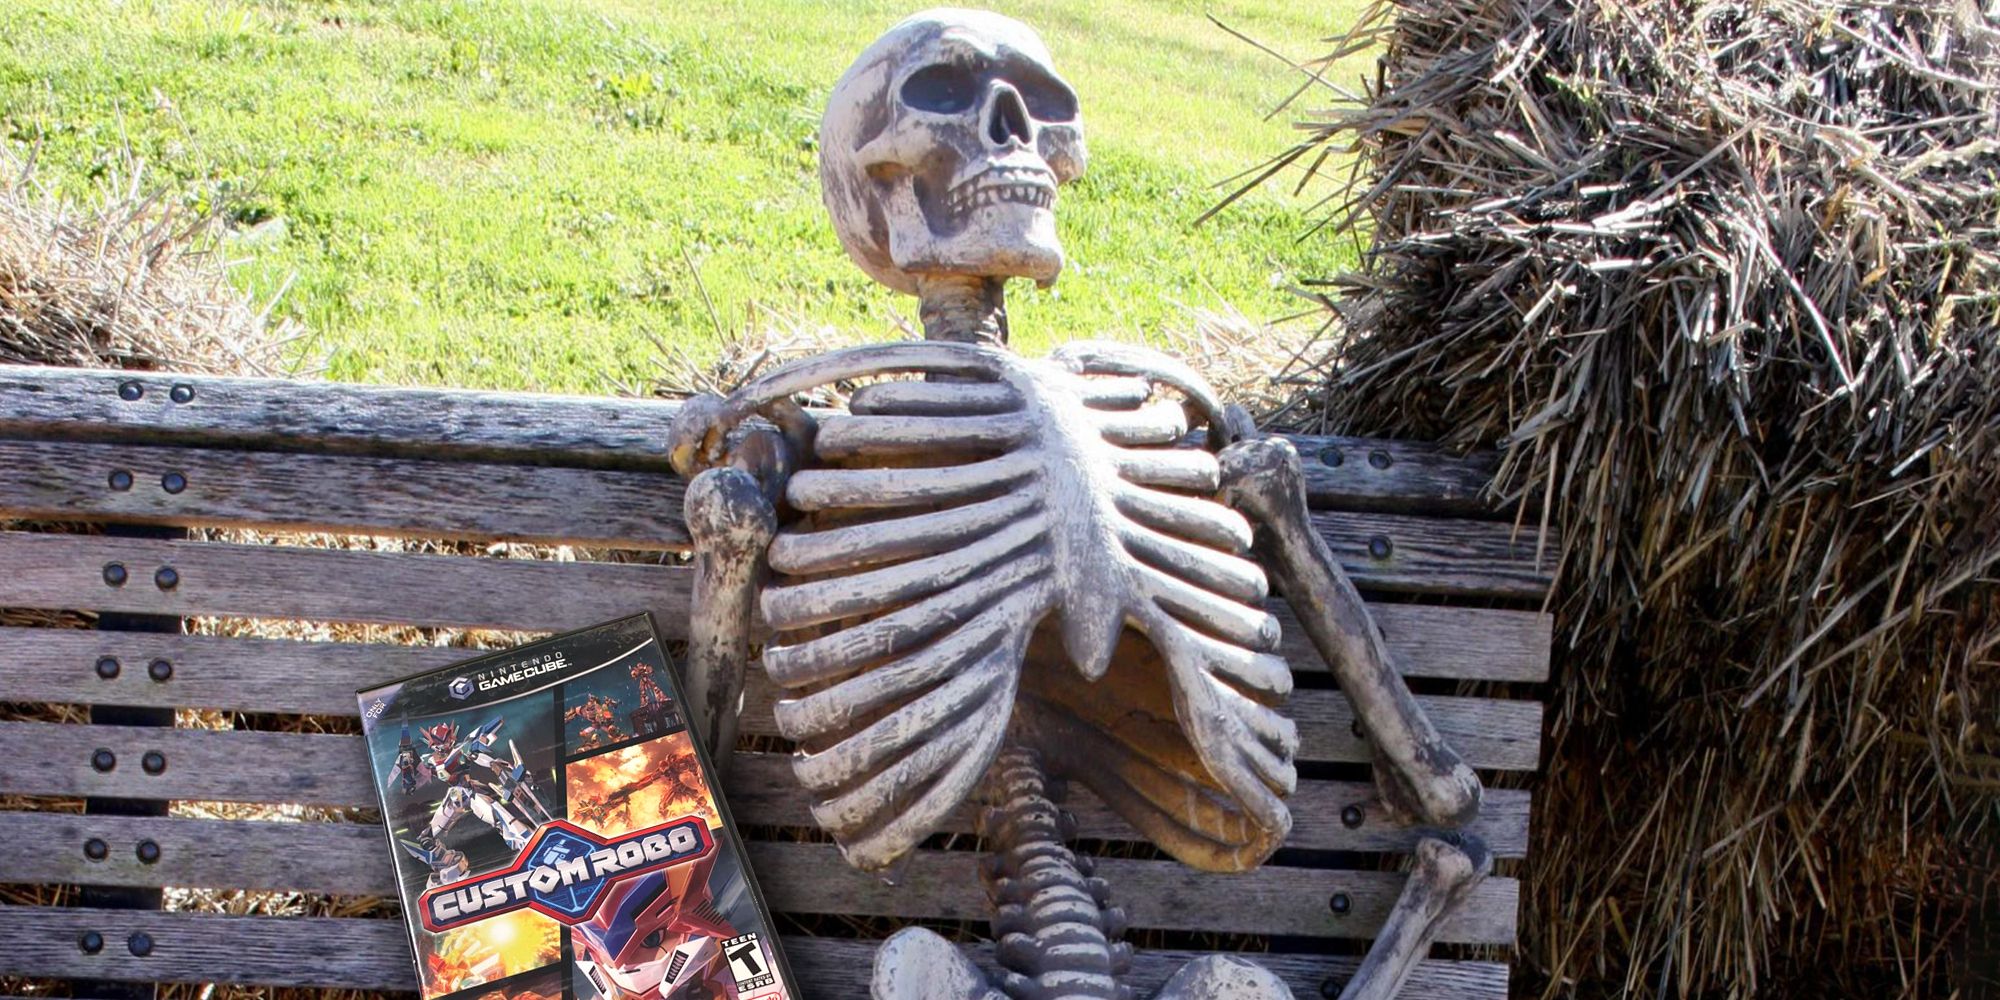 A skeleton on a wooden bench with a copy of Custom Robo for GameCube sitting next to it